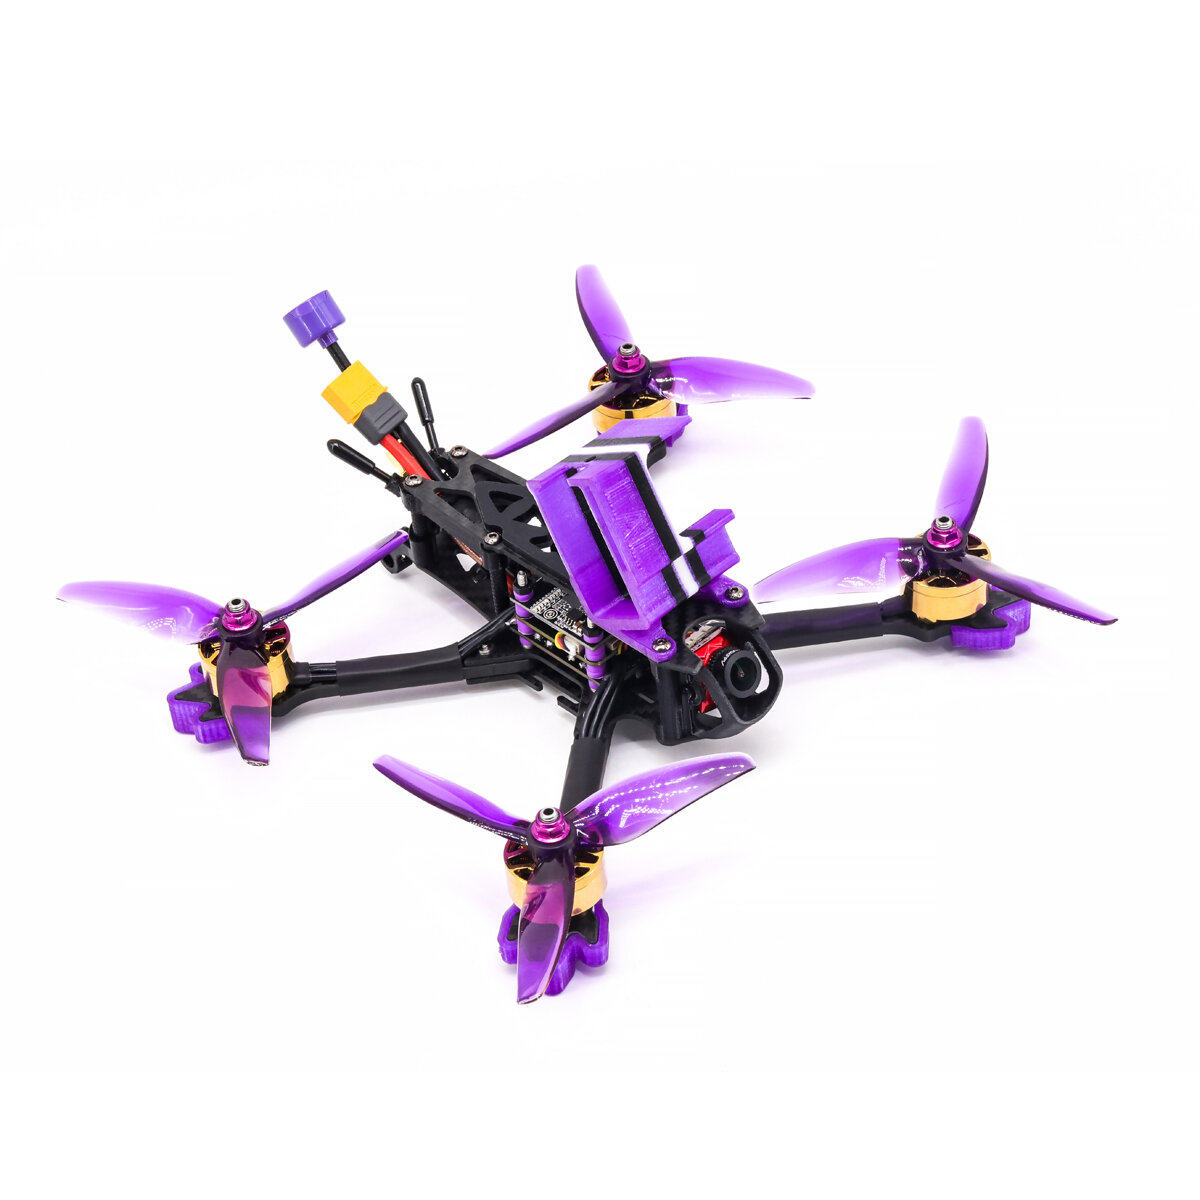 Eachine LAL 5style 220mm 4S Freestyle 5 Inch FPV Racing Drone PNP/BNF F4 Bluetooth FC Caddx Ratel 2307 2450KV Motor 50A